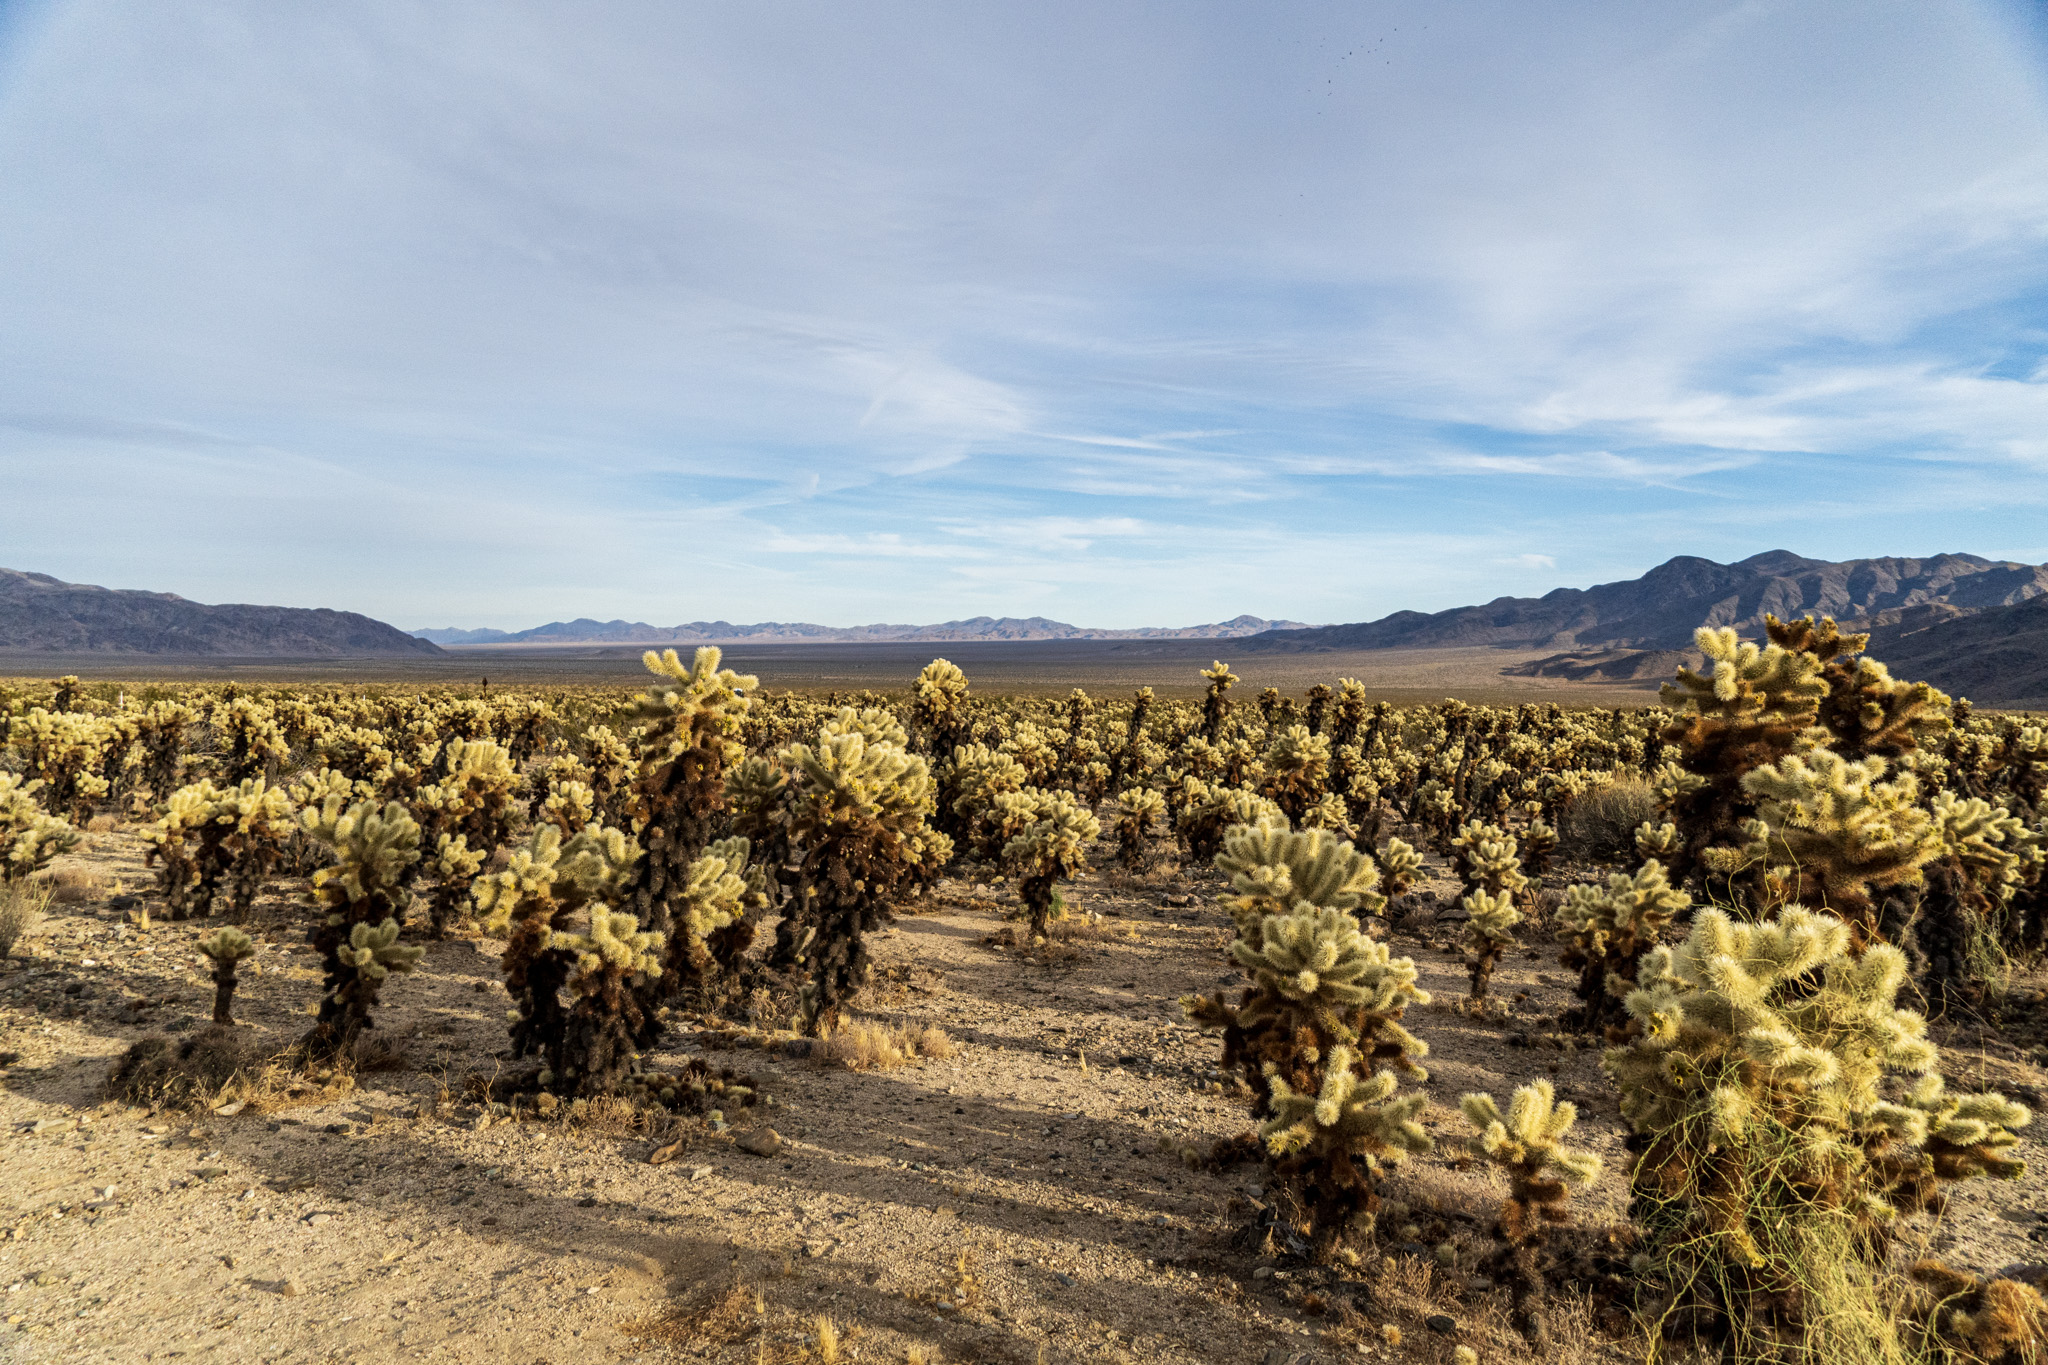 Cholla cactus fill the lower half of frame and spread toward the hoorizon.